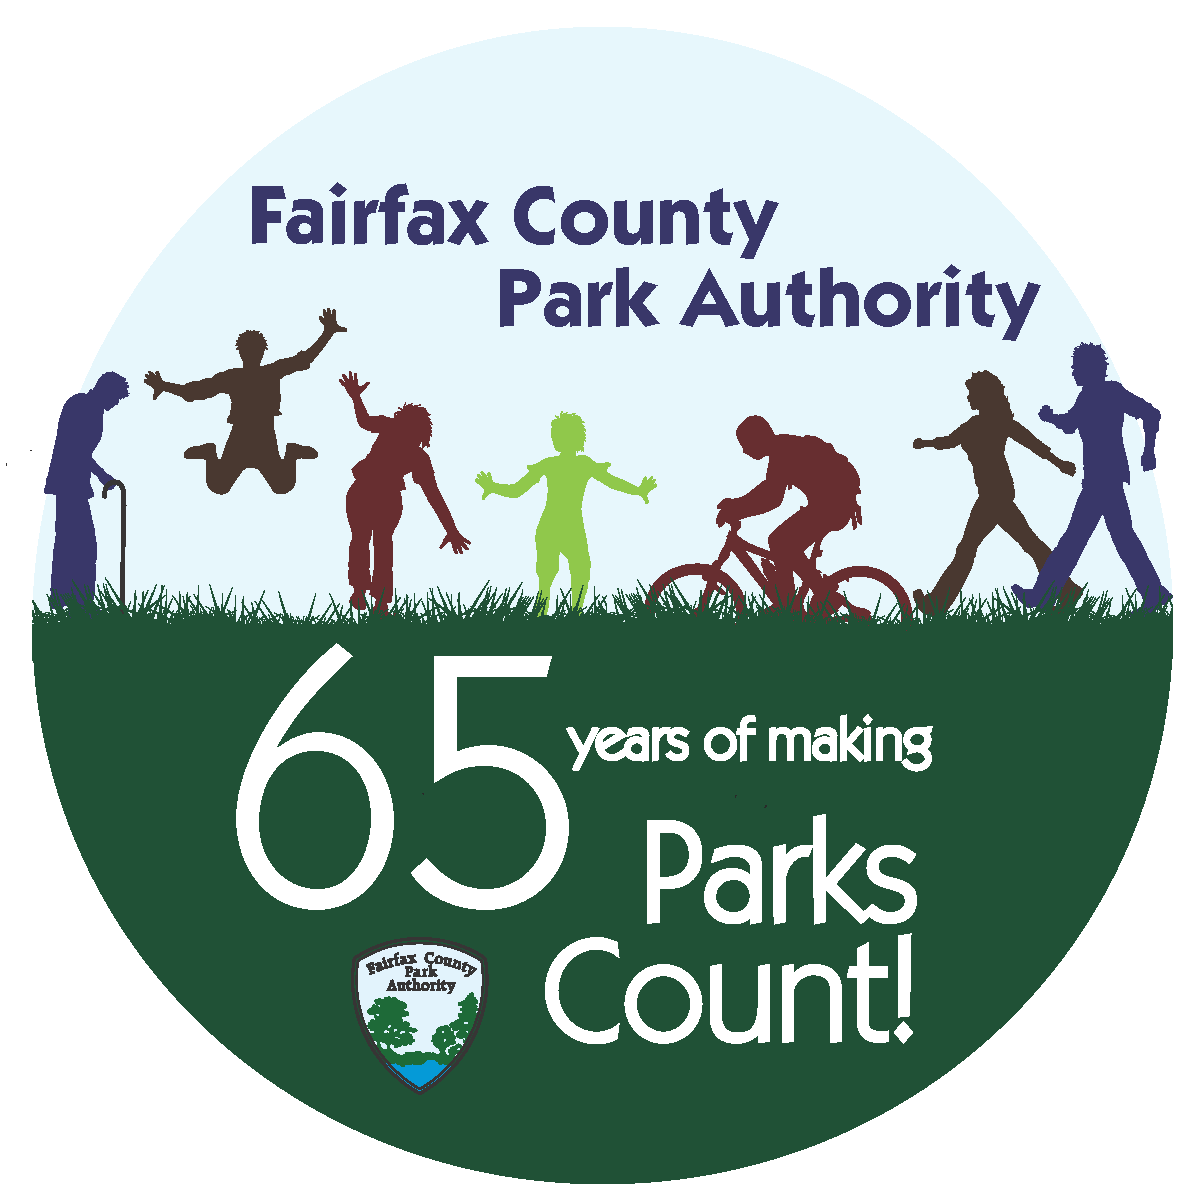 65 Years of Making Parks Count